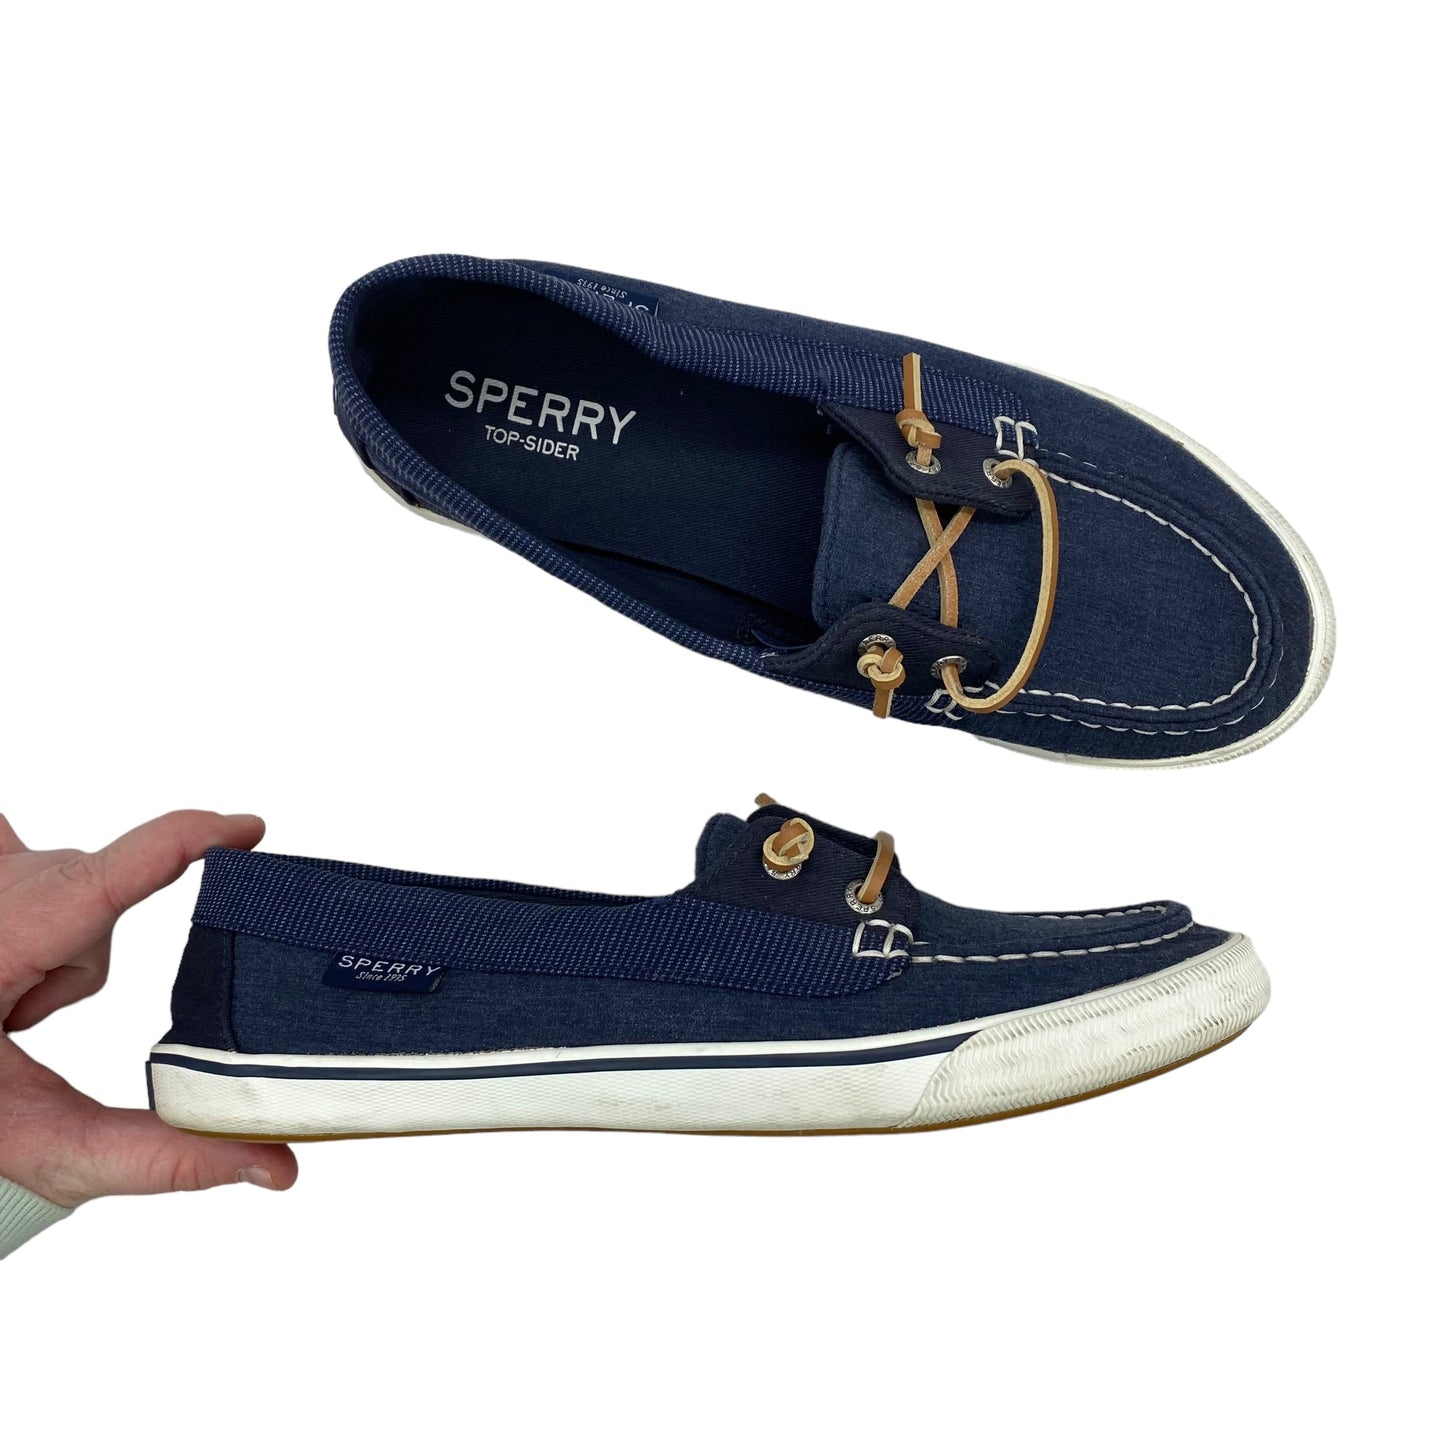 BLUE SHOES FLATS by SPERRY Size:8.5